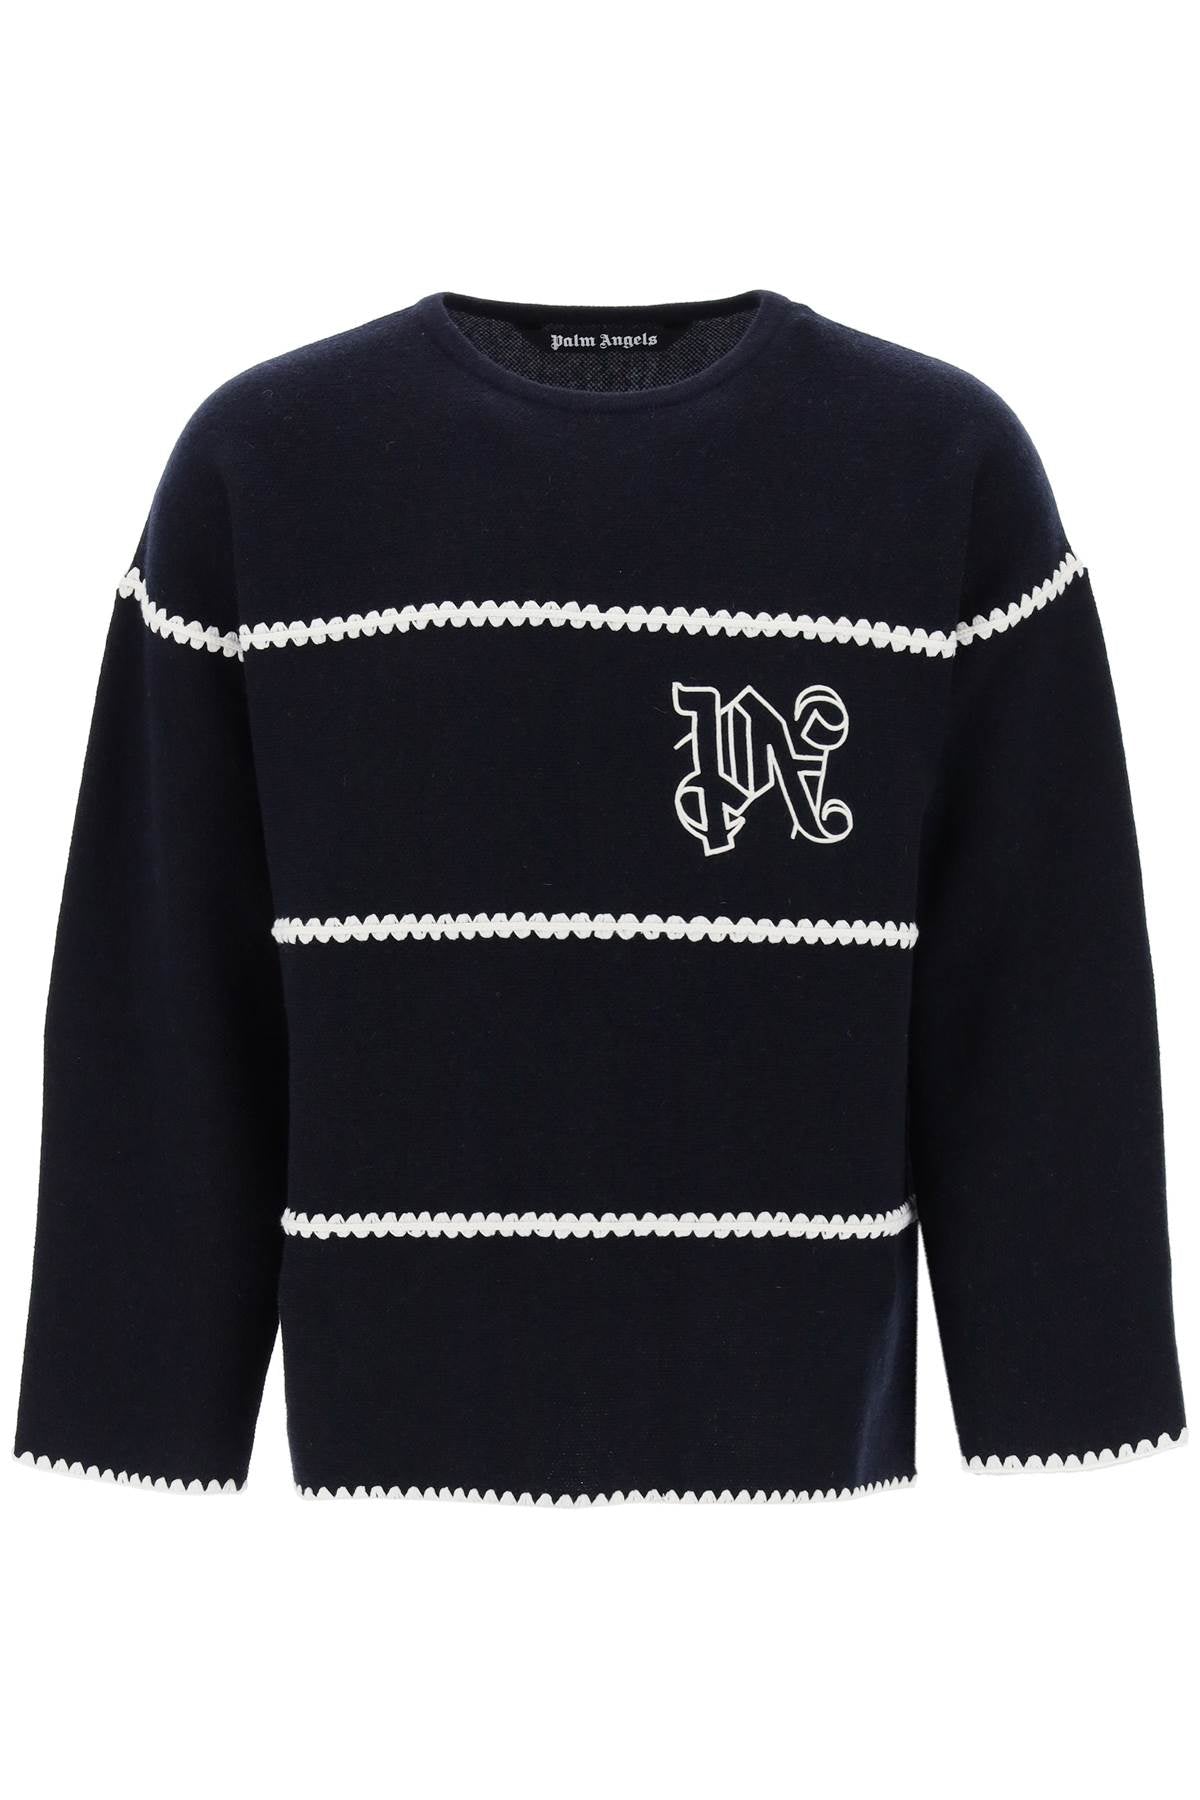 PALM ANGELS Blue Contrast Embroidered Knit Wool Pullover for Men